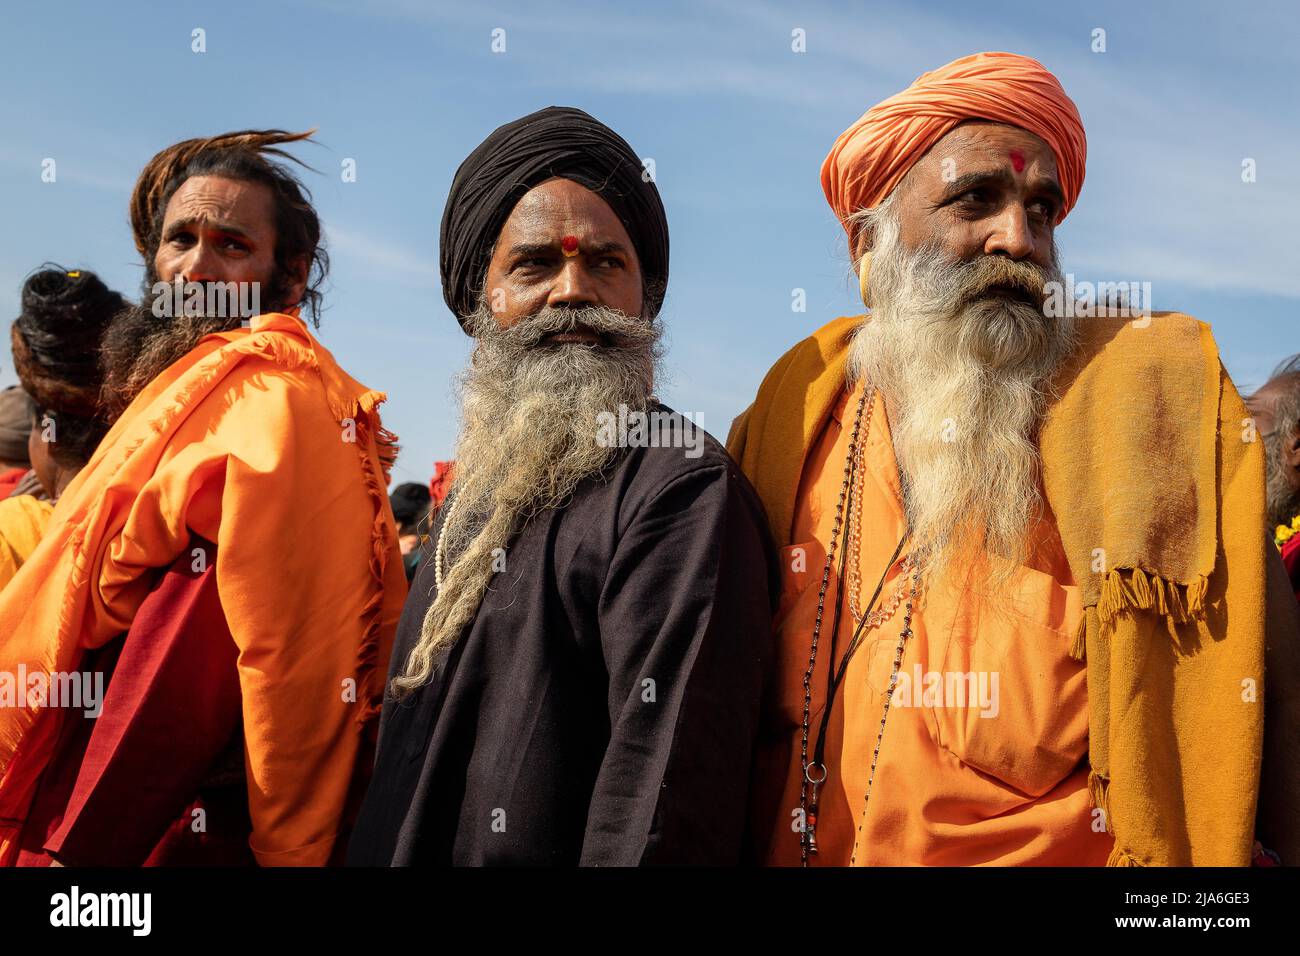 Sadhus looking backwords during the procession to the holy Ganges river during the Kumbh Mela. Every twelve years, millions of Hindu devotees begin a massive pilgrimage to the most sacred of Indian festivals: the Kumbha Mela, which takes place in Prayagraj, a place considered particularly auspicious because it is at the confluence of the Ganges, Yamuna and the mythical Saraswati. It is estimated that in 2019, 120 million people attended the sacred enclosure over the course of a month and a half. These numbers, equivalent to the total population of Japan, and 40 times the number of pilgrims who Stock Photo